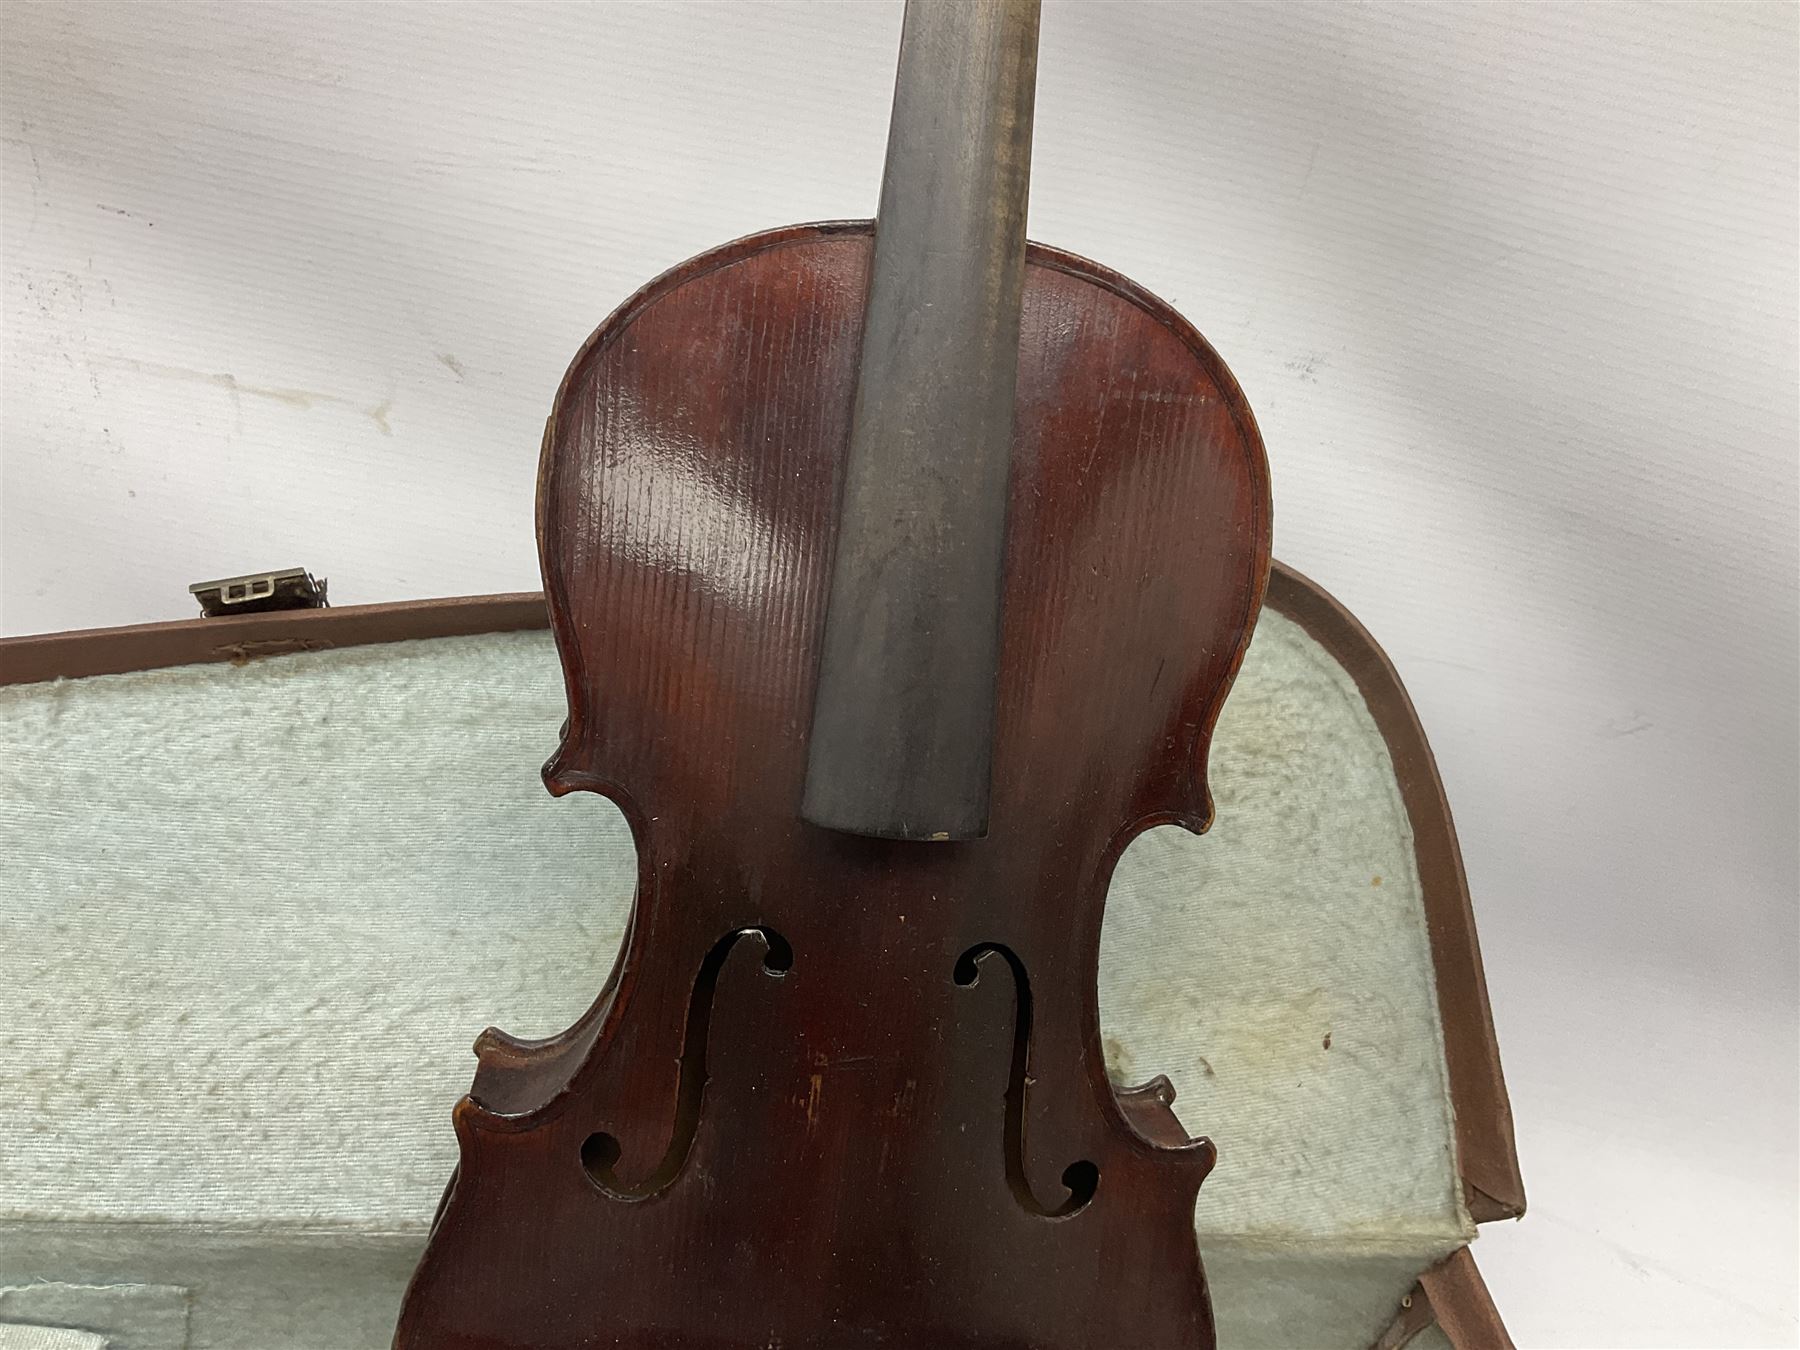 Late 19th century French violin for restoration and completion with 36cm two-piece maple back and ri - Image 12 of 19